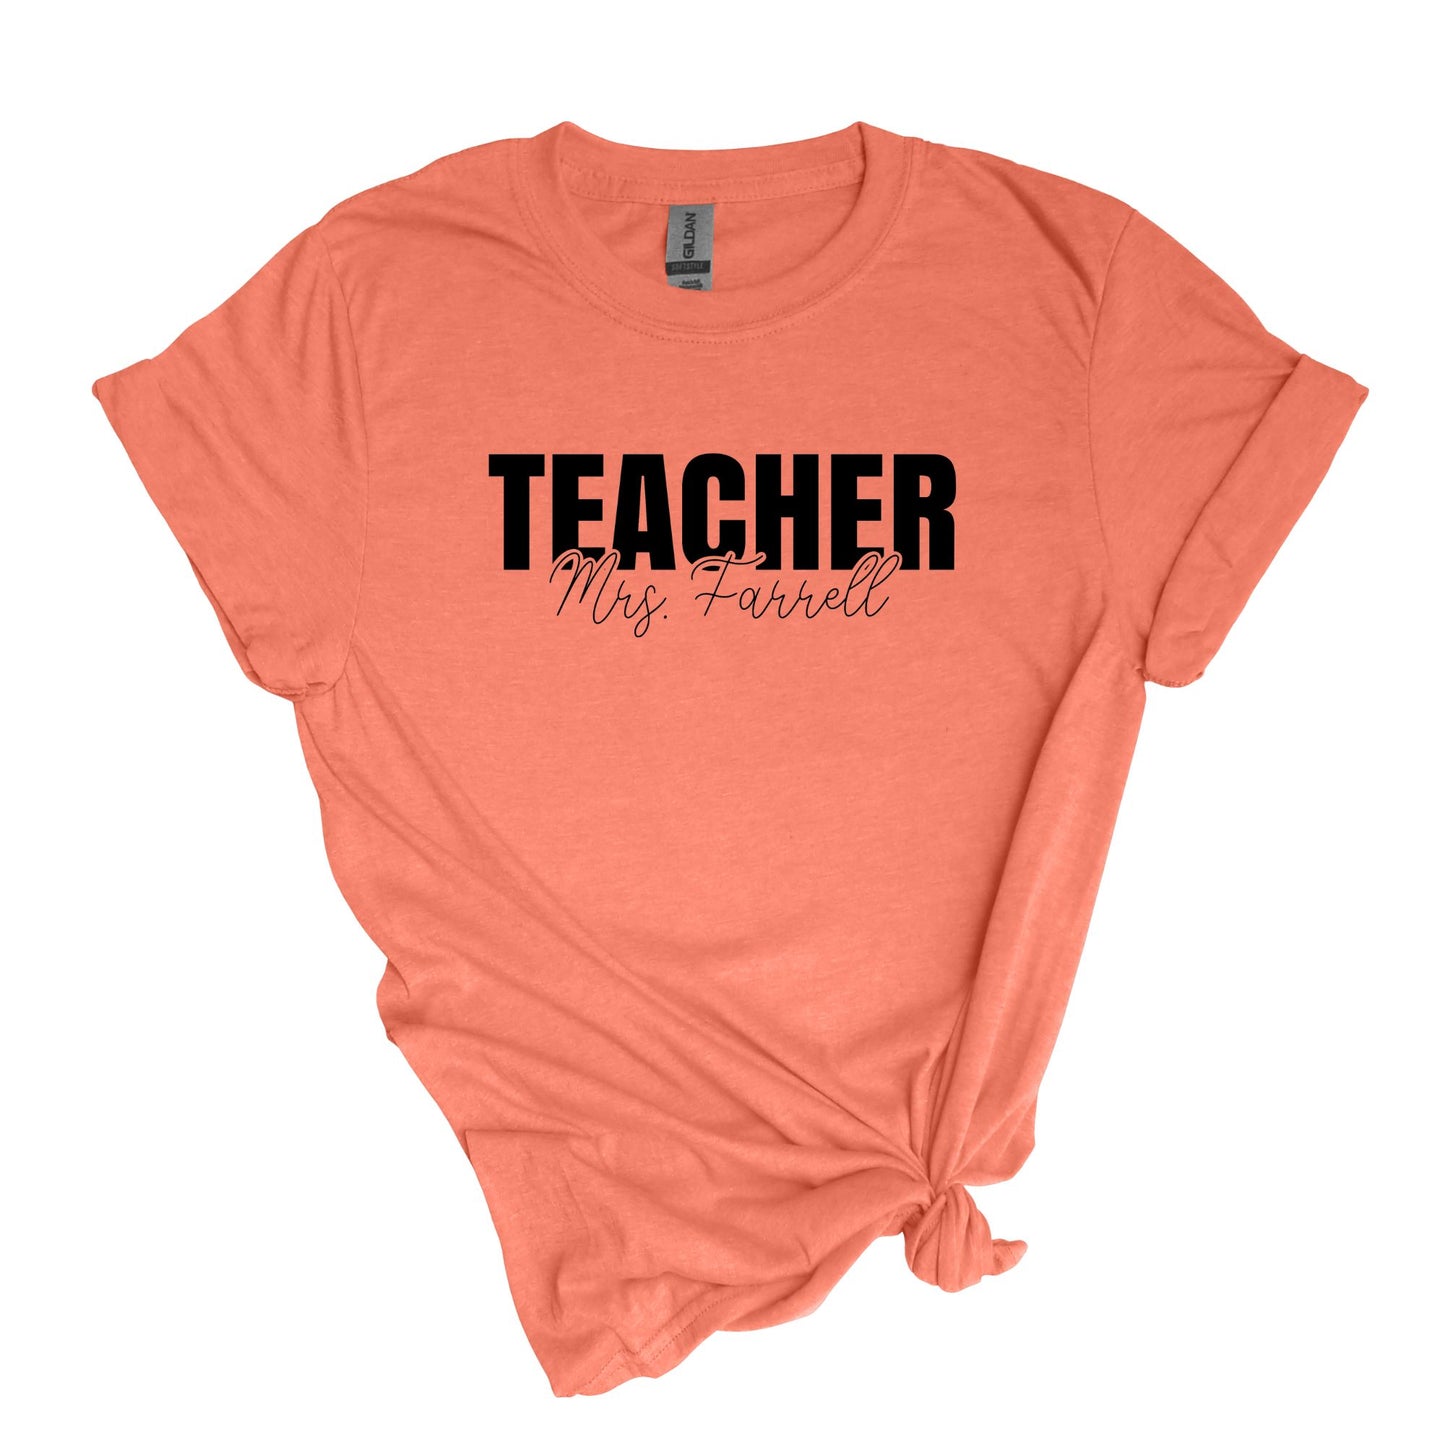 TEACHER T-shirt - Personalized with Teacher's Name!